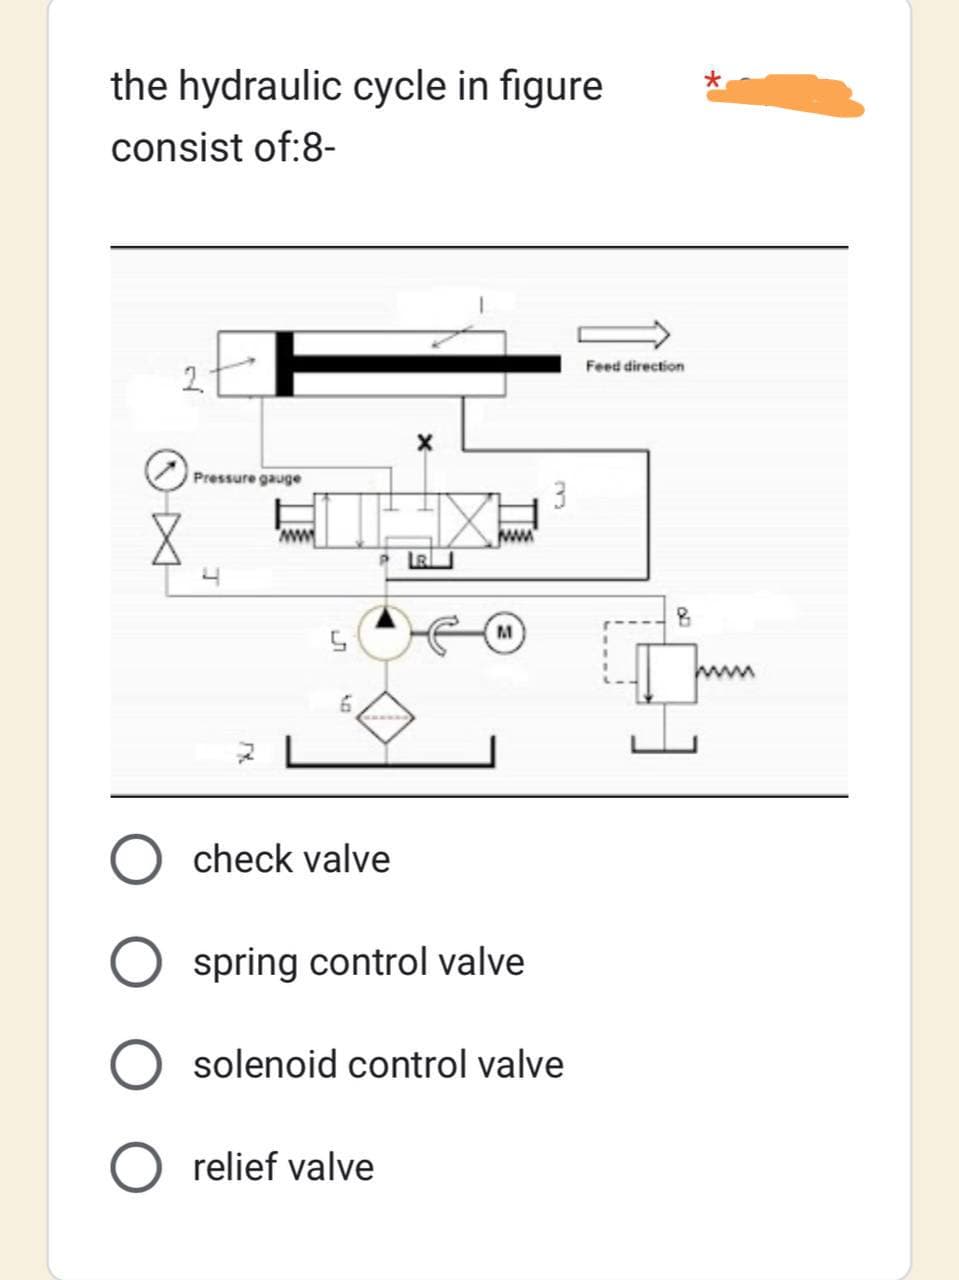 the hydraulic cycle in figure
consist of:8-
2 EF
Pressure gauge
7
www
5
6
check valve
X
LR
O relief valve
www.
M
spring control valve
3
solenoid control valve
Feed direction